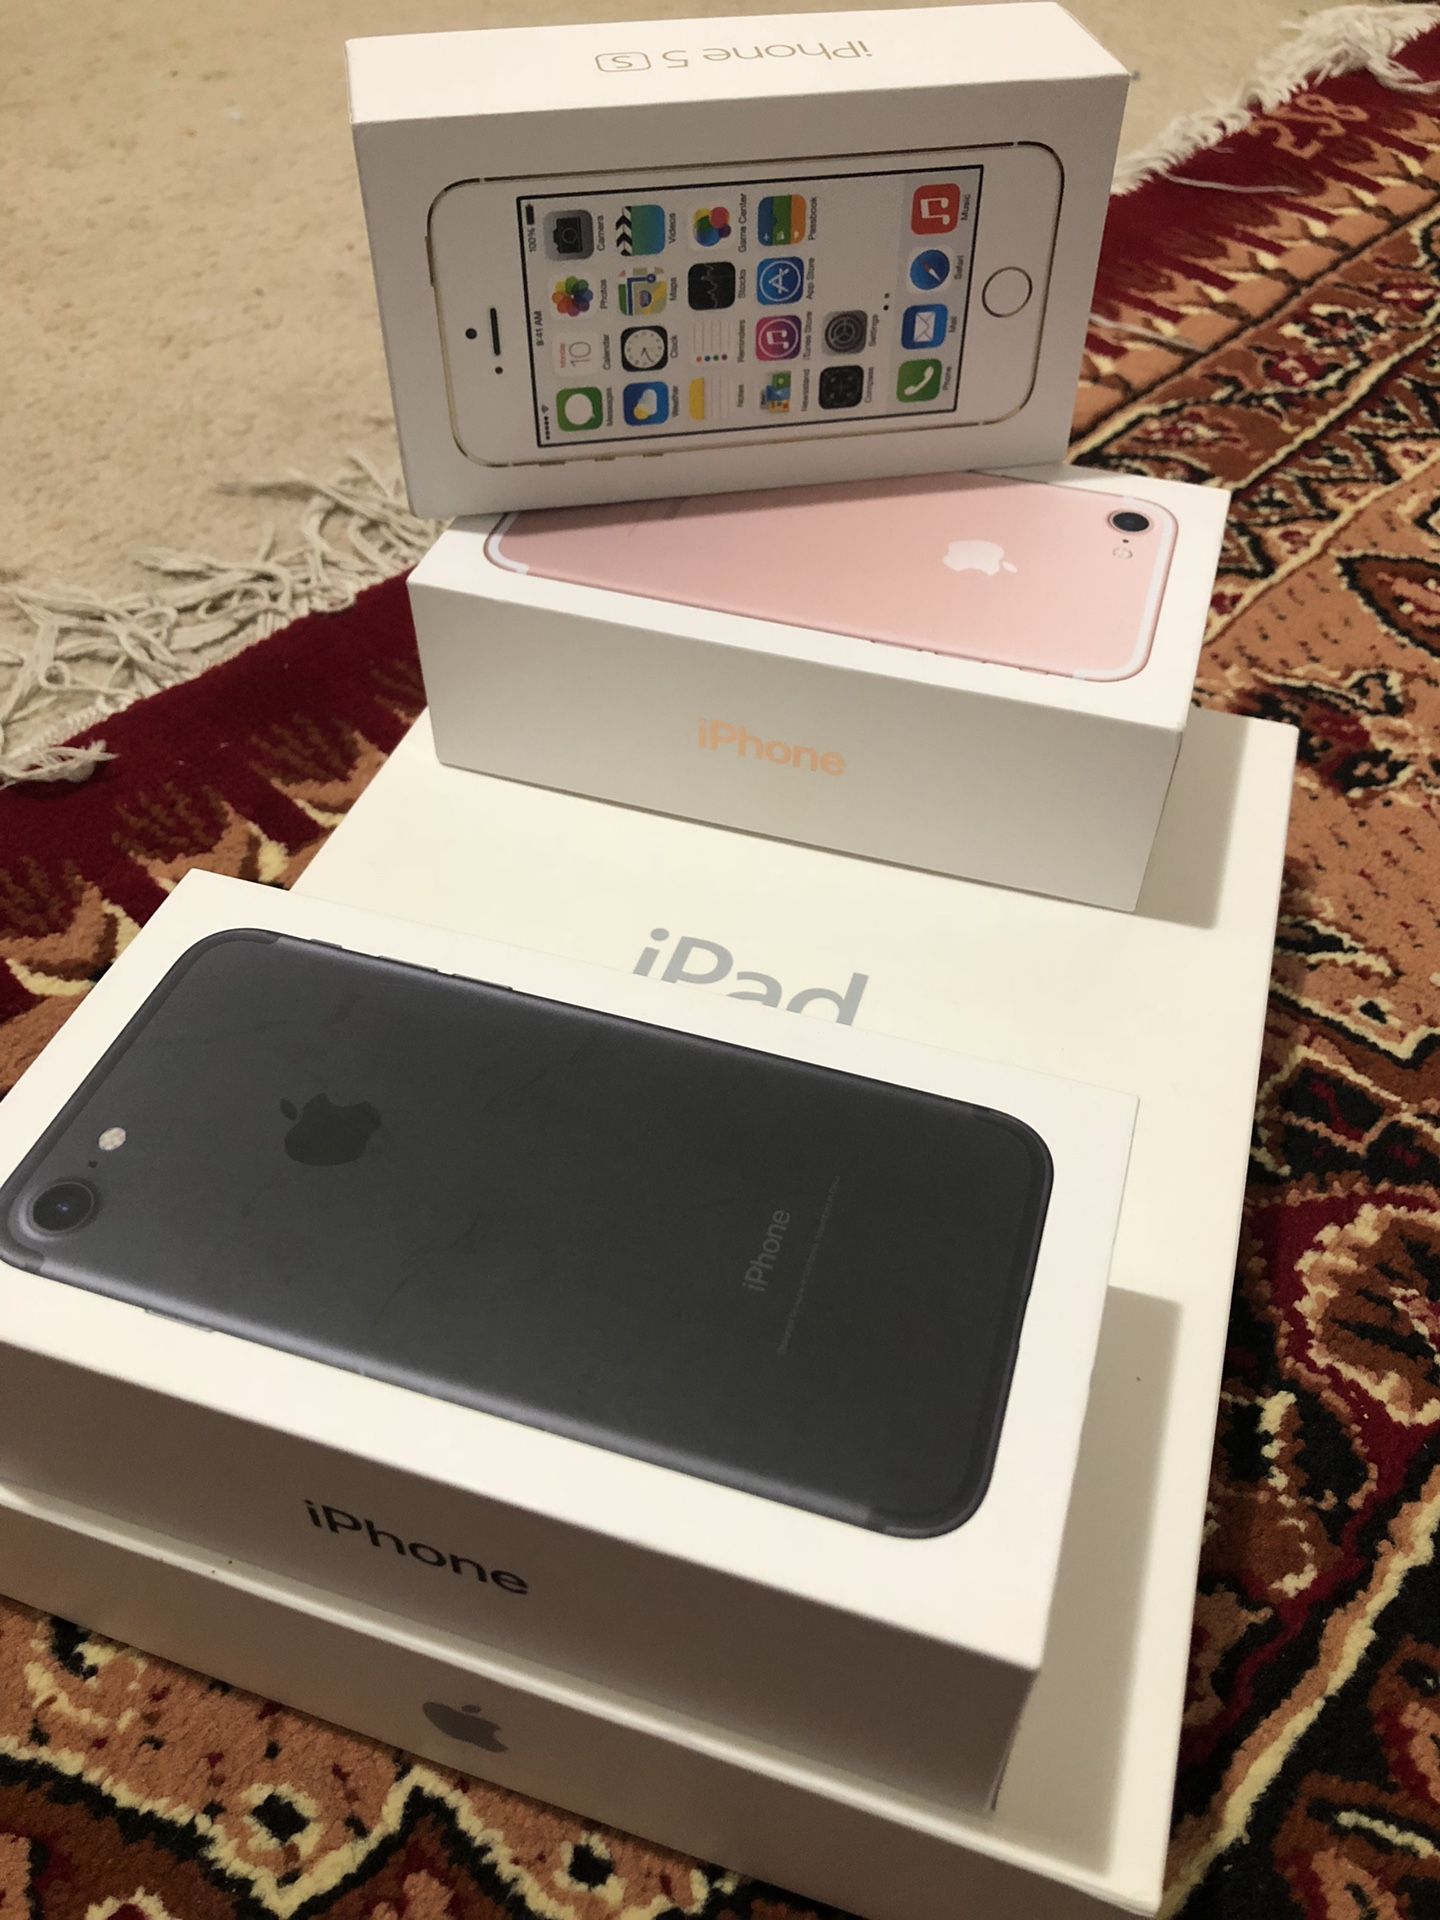 Apple IPad,2 iPhone7 and iPhone5s boxes only